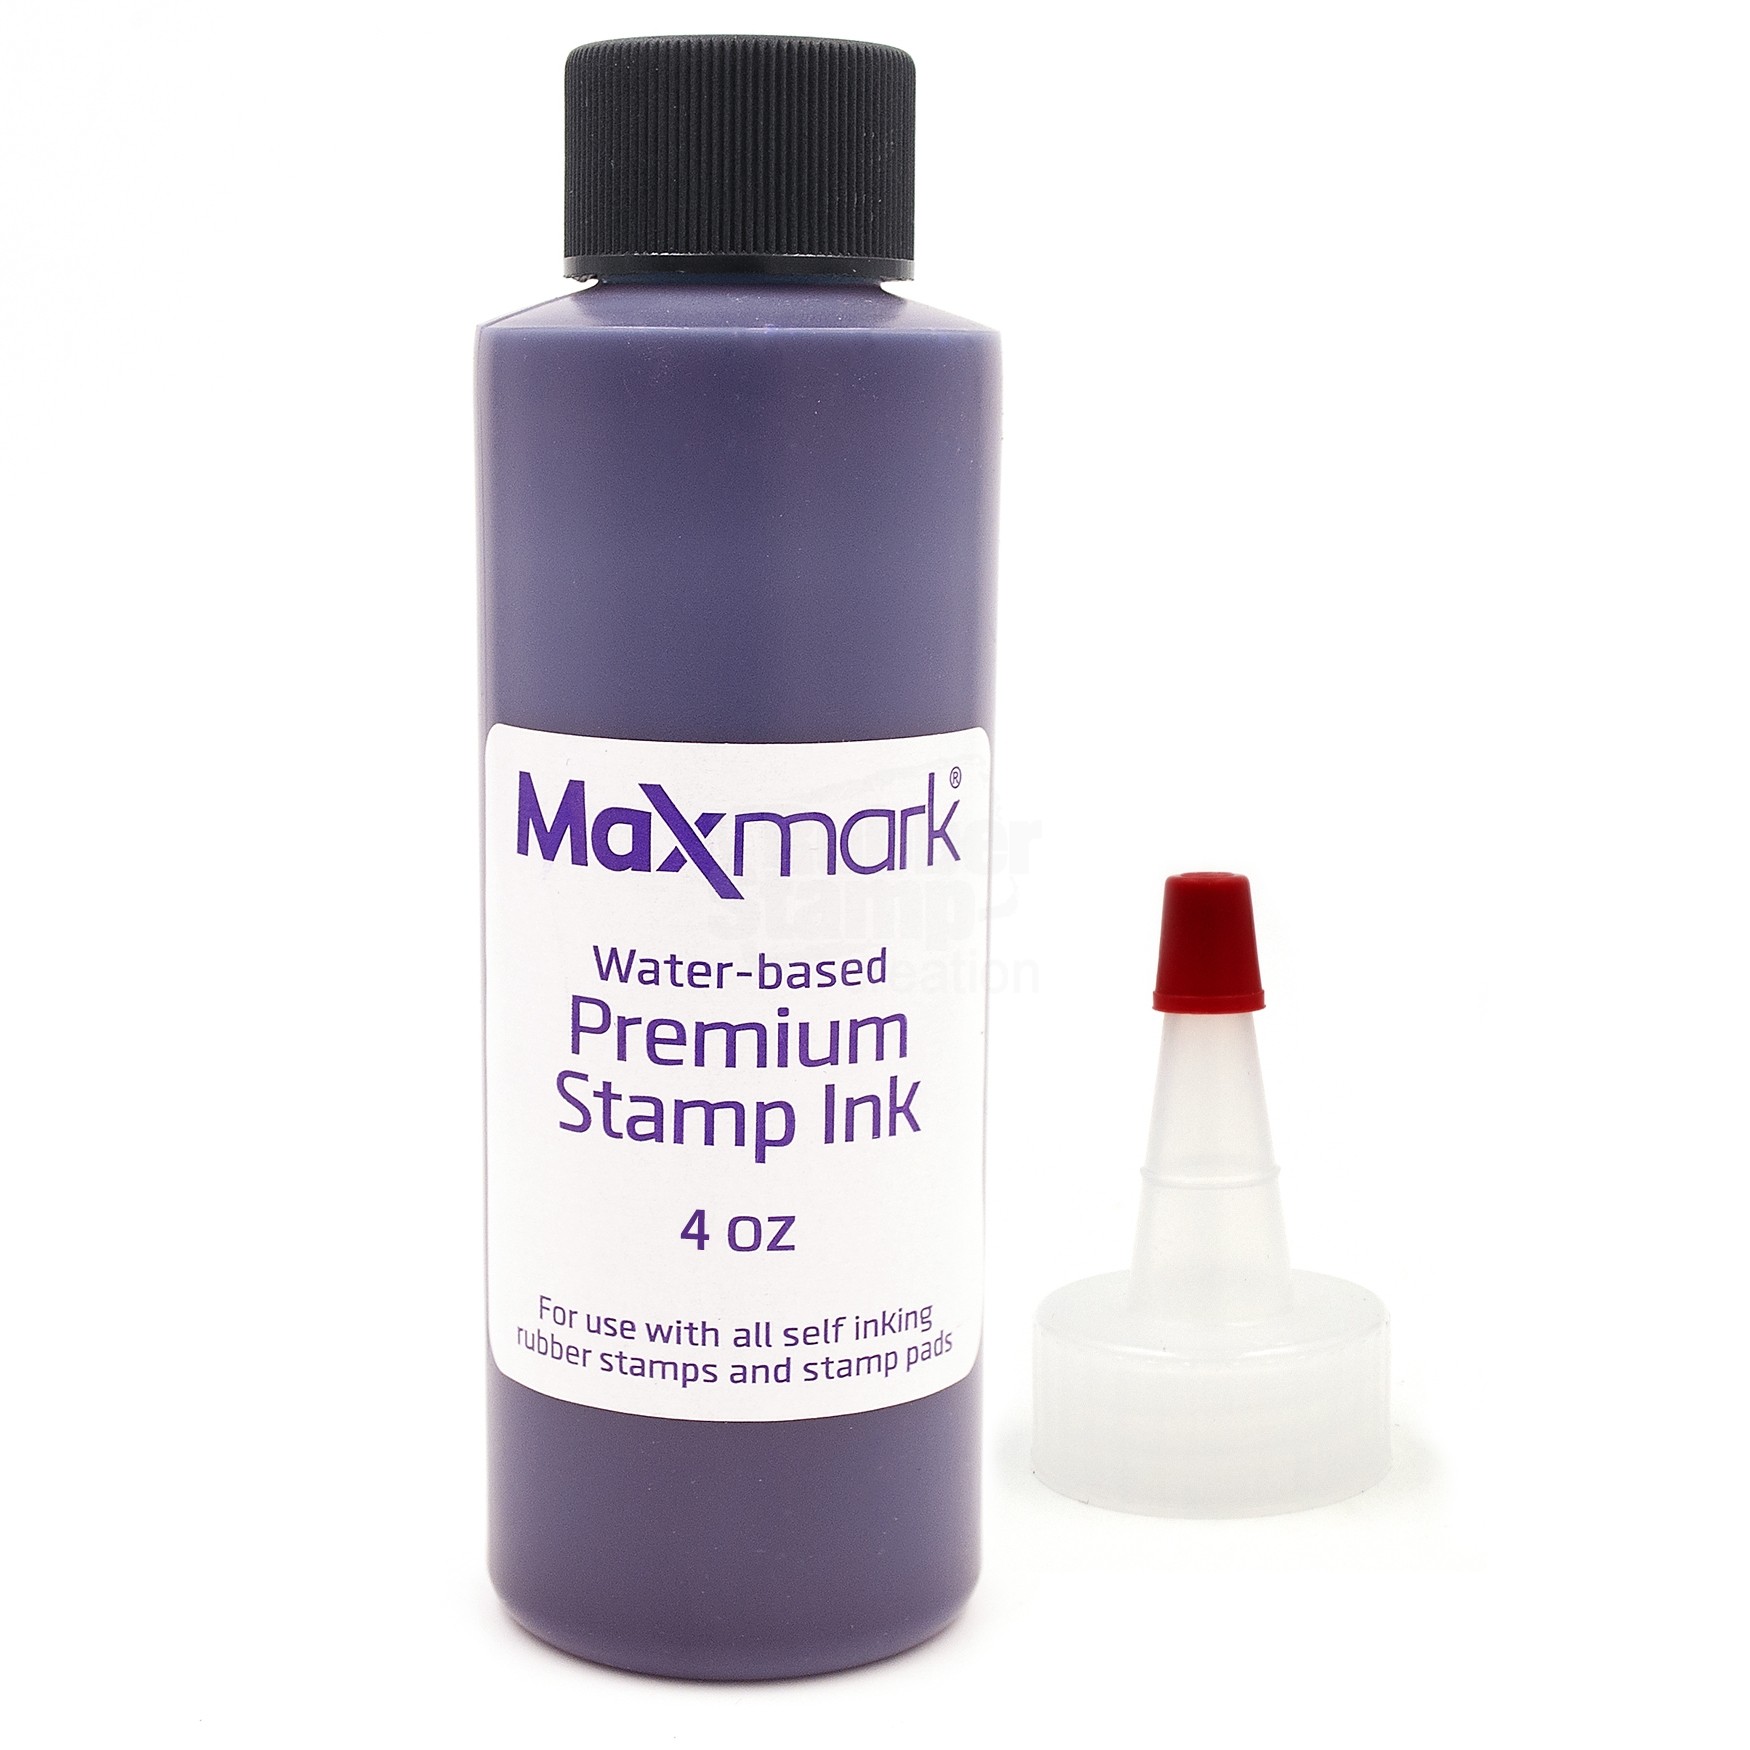 STAMP Ink Refill for Pre-Ink Stamps, 5 Colors Including Red, Green, Blue,  Orange, and Purple, Pack of 5